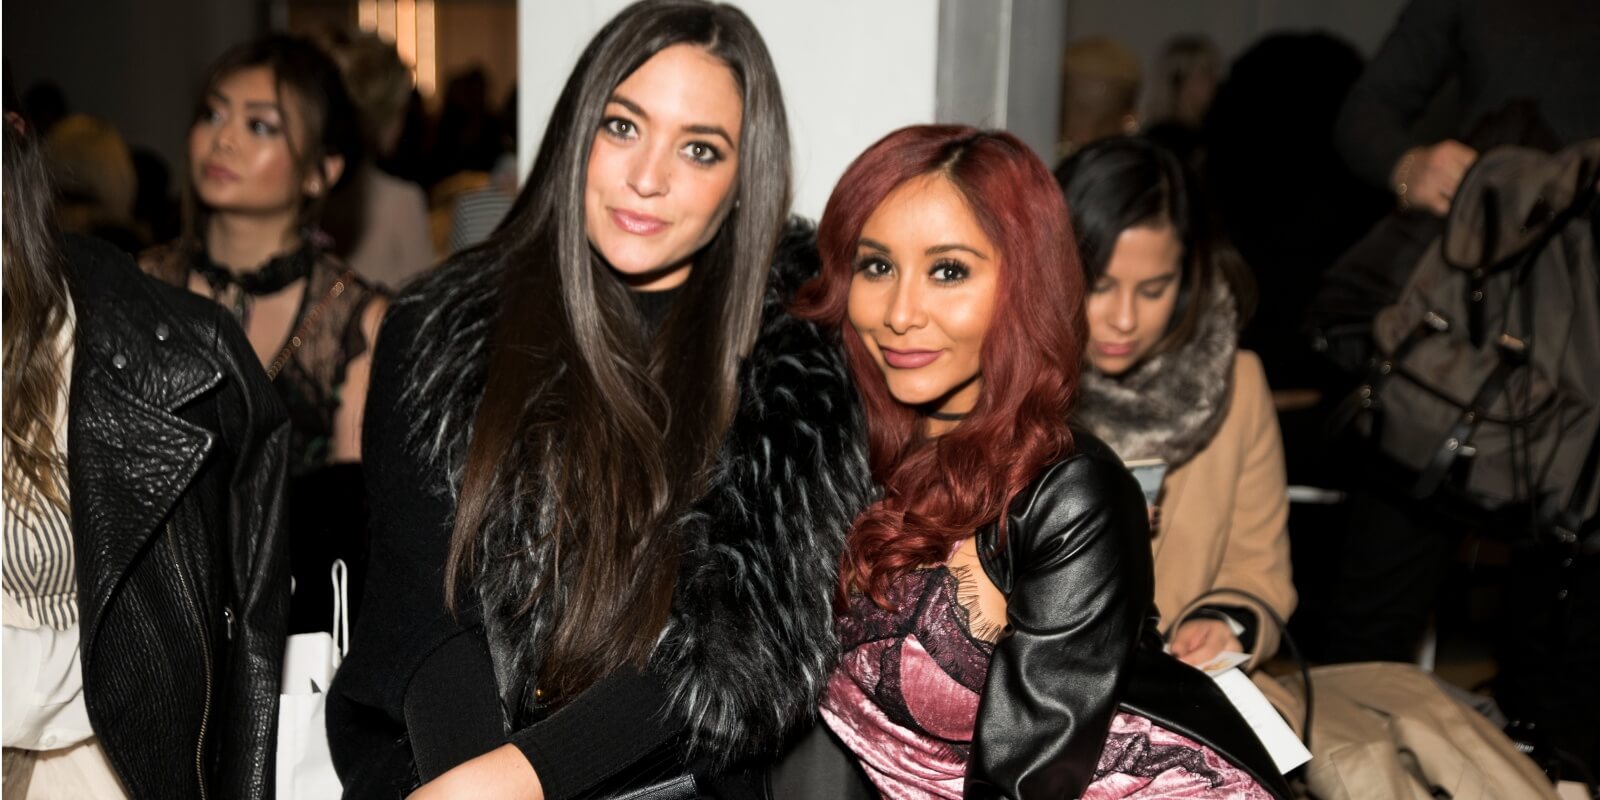 Nicole Polizzi and Sammi Giancola pose for a photograph in 2017.